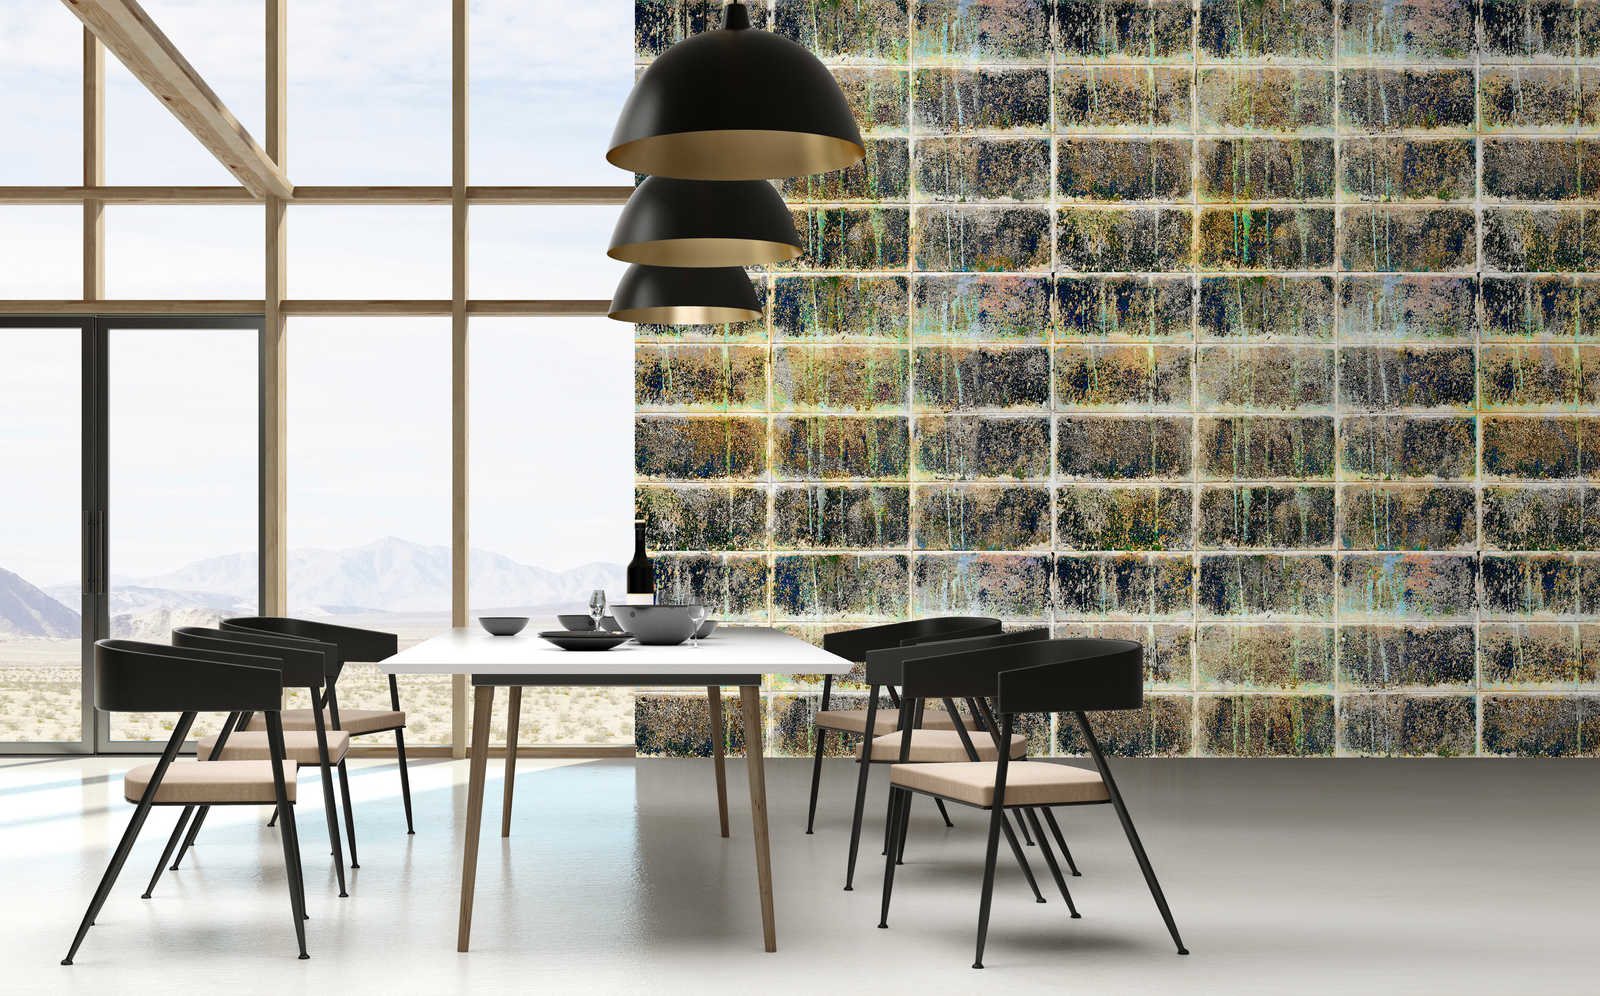             Factory 1 - wall mural used optics tile mirror industrial design
        